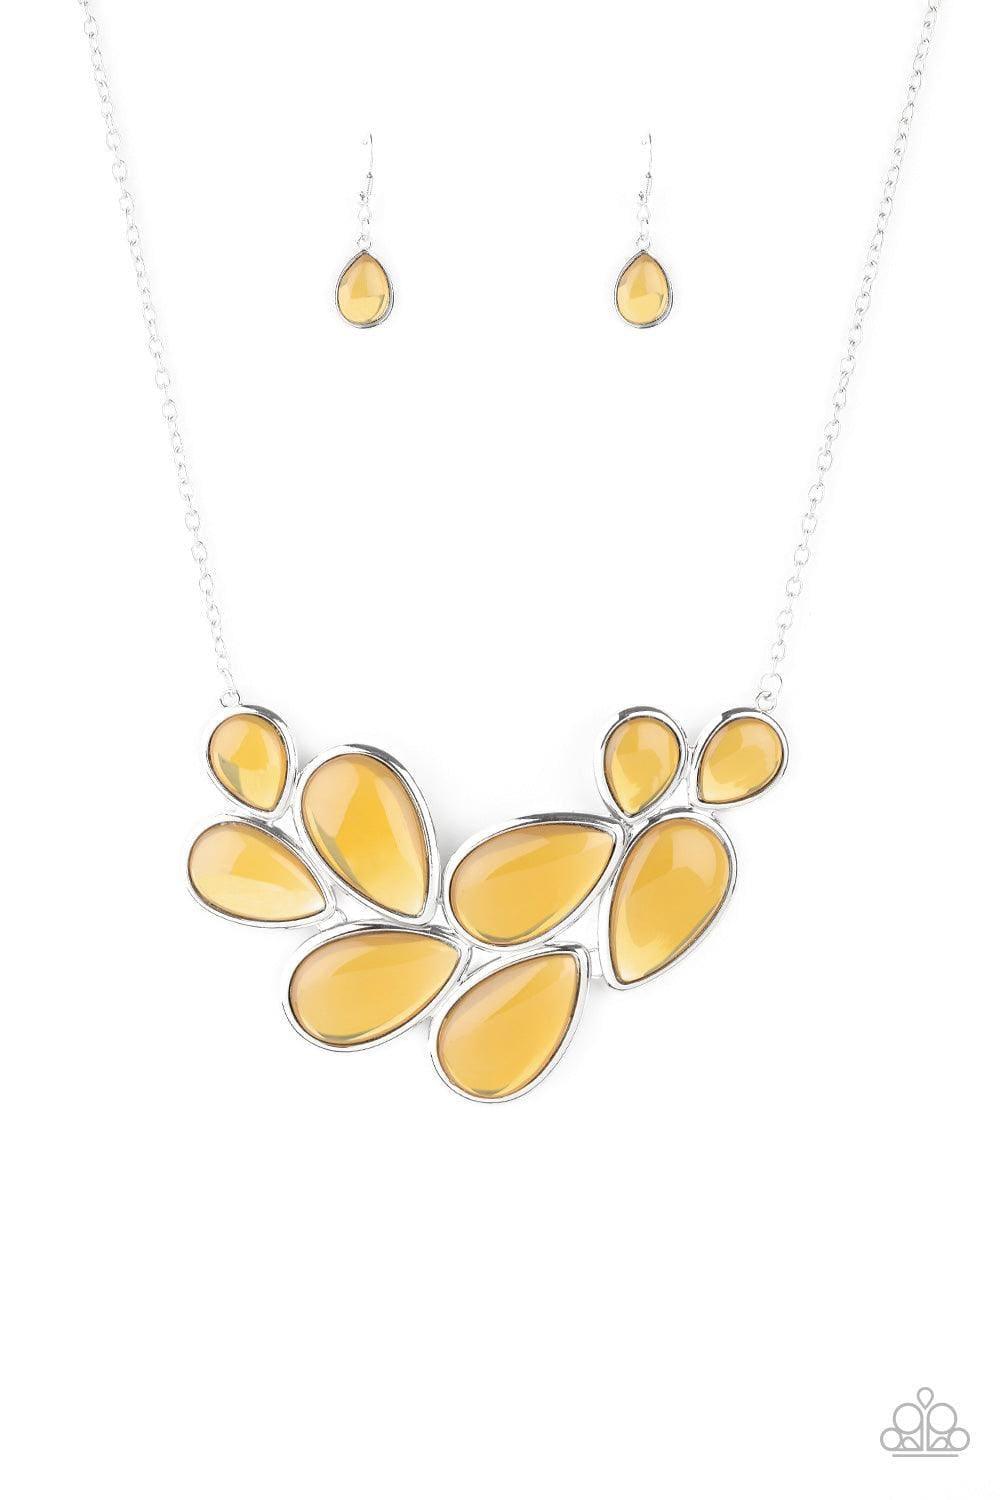 Paparazzi Accessories - Iridescently Irresistible - Yellow Necklace - Bling by JessieK